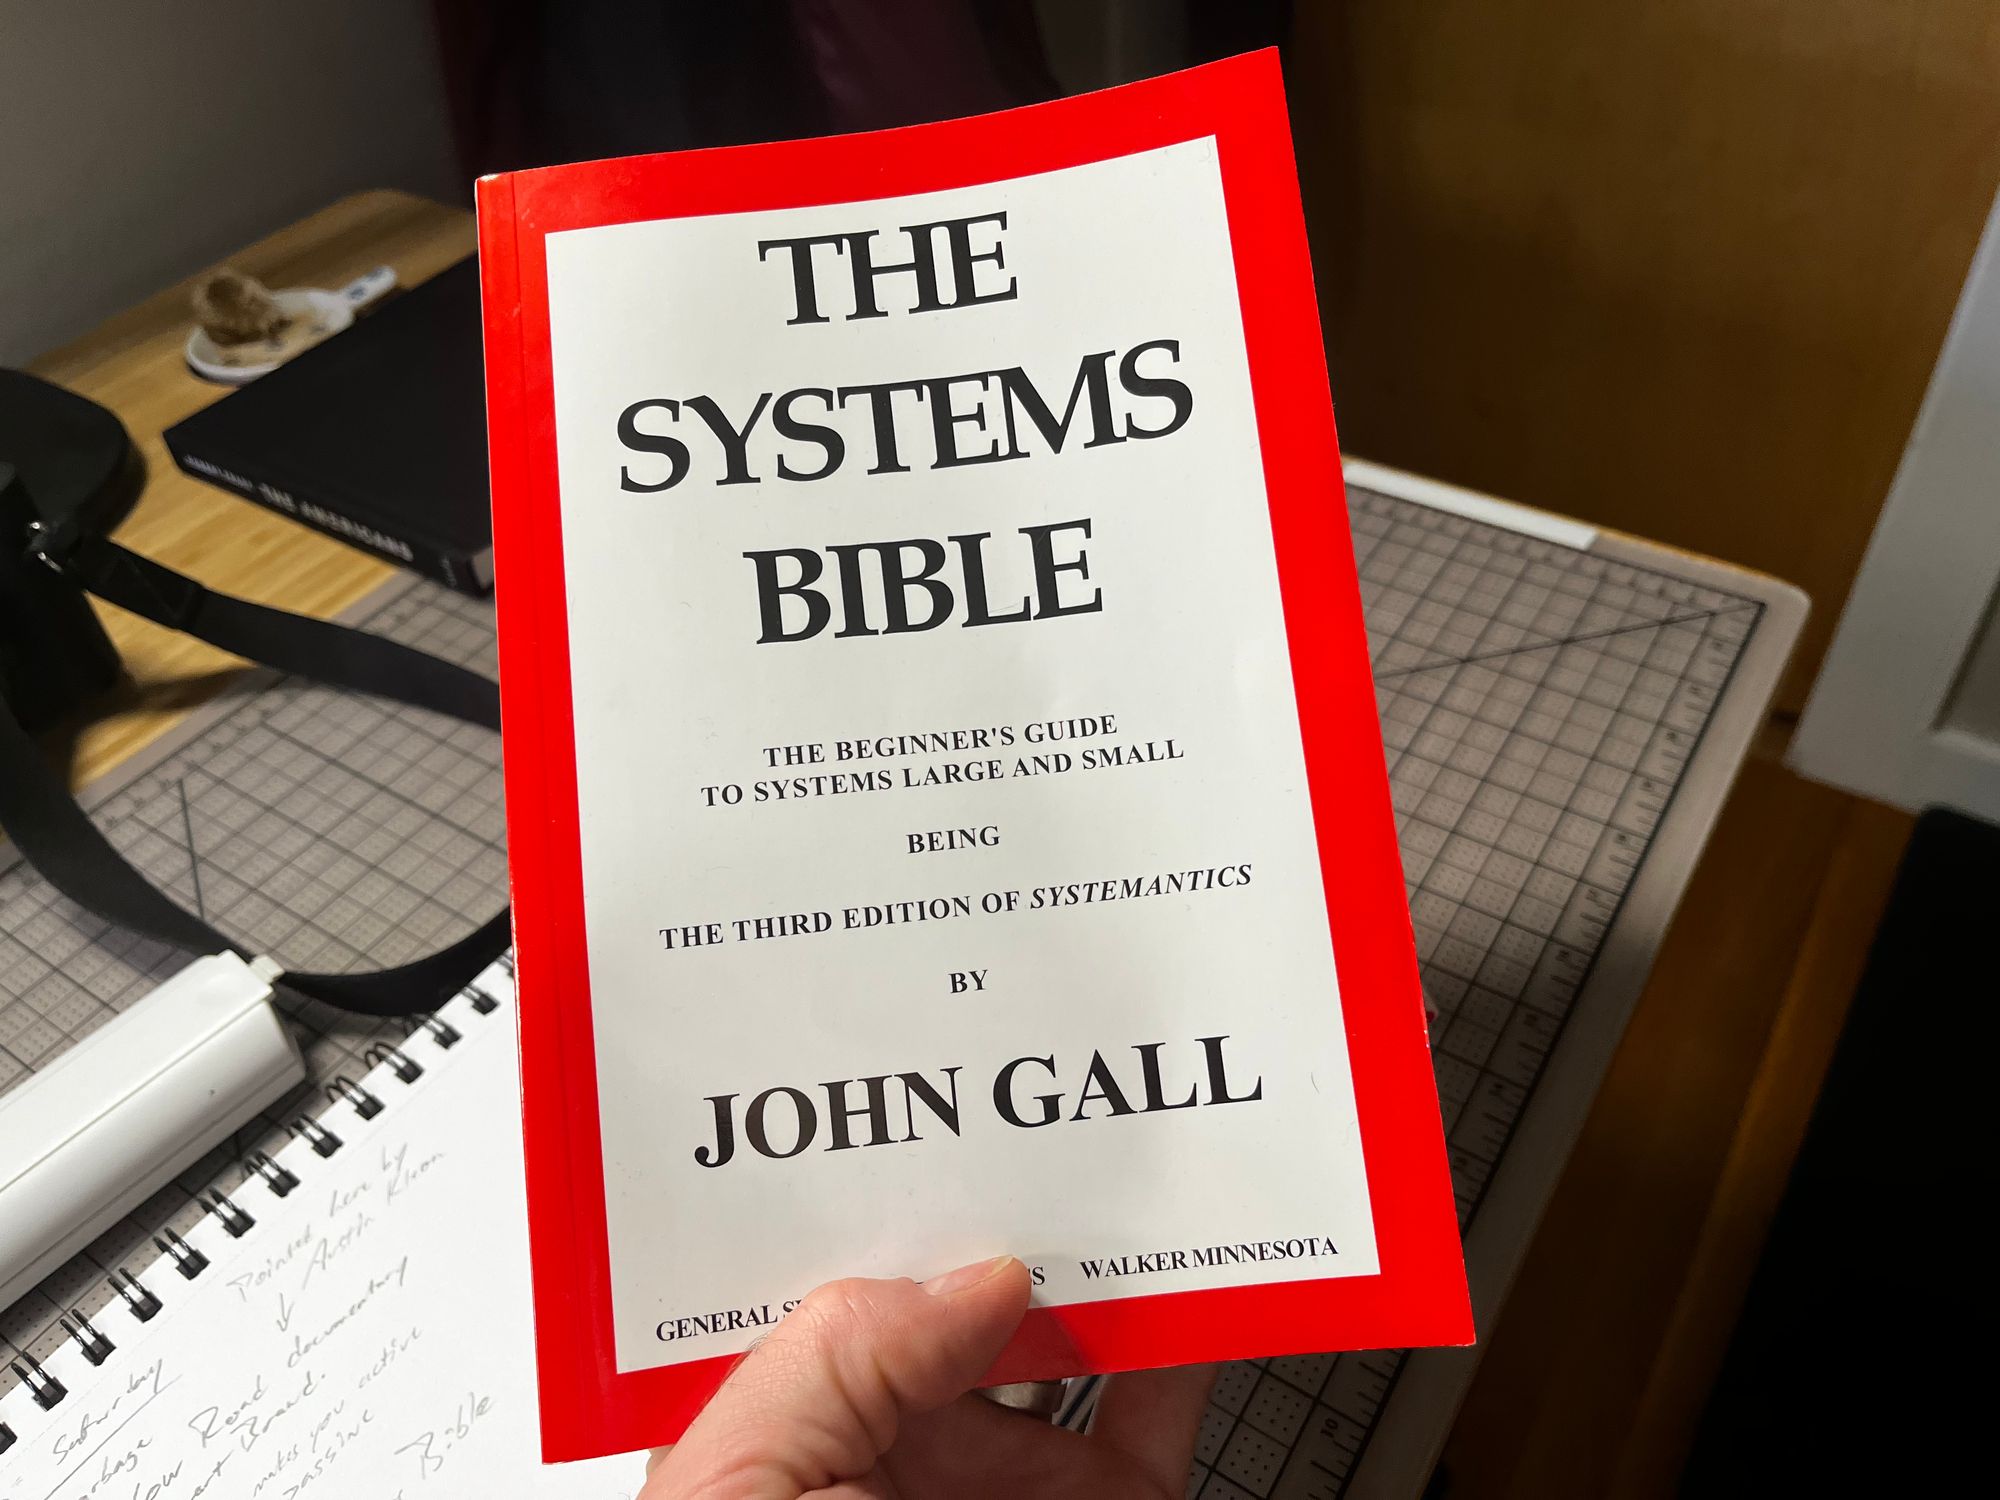 After Re-reading: The Systems Bible